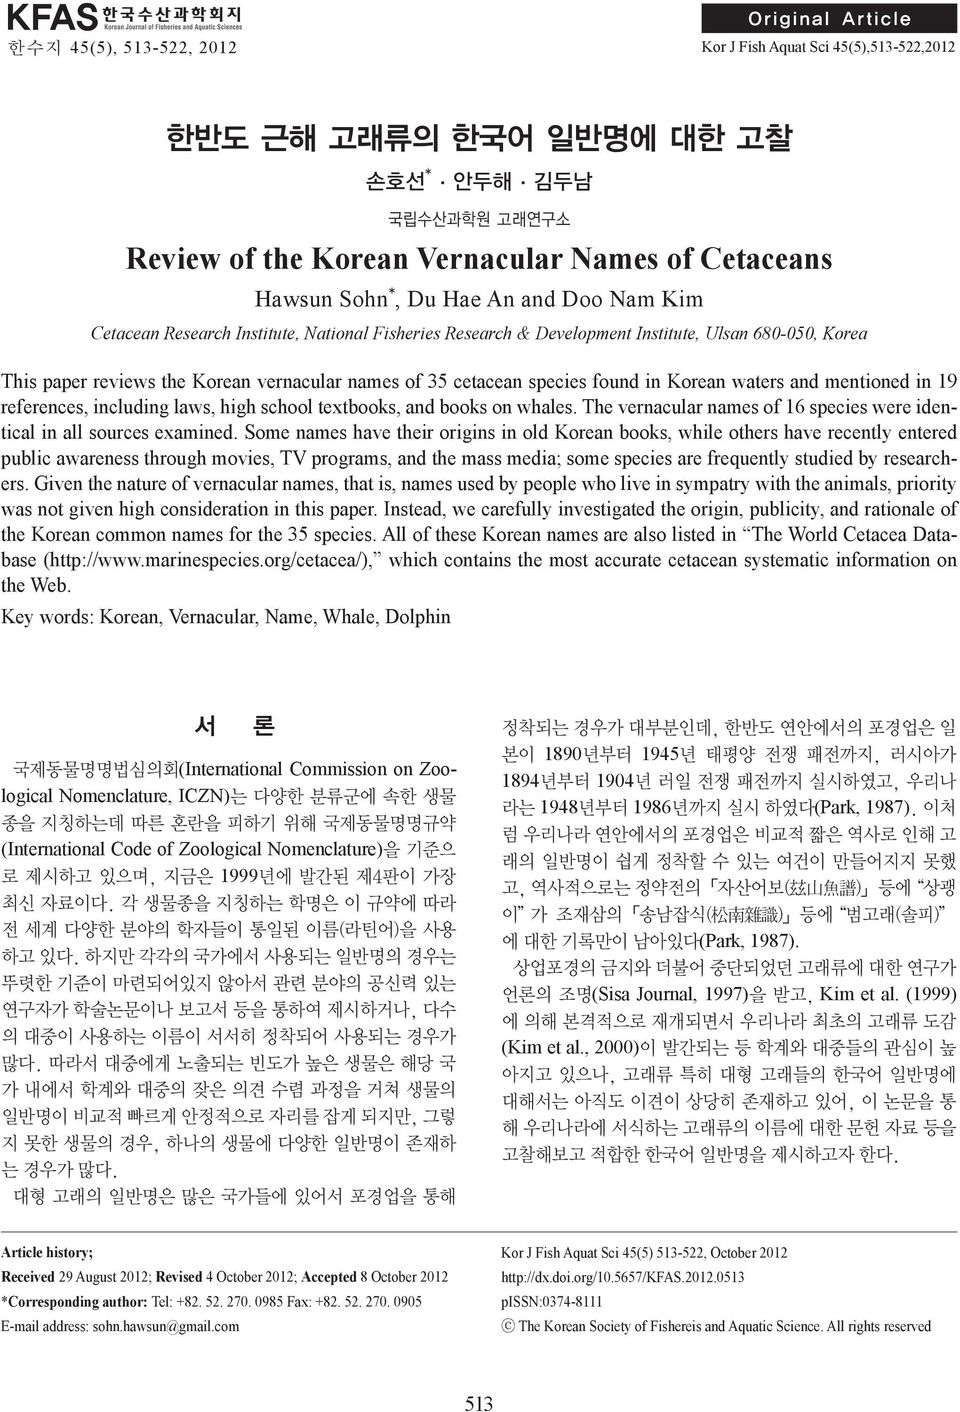 680-050, Korea This paper reviews the Korean vernacular names of 35 cetacean species found in Korean waters and mentioned in 19 references, including laws, high school textbooks, and books on whales.